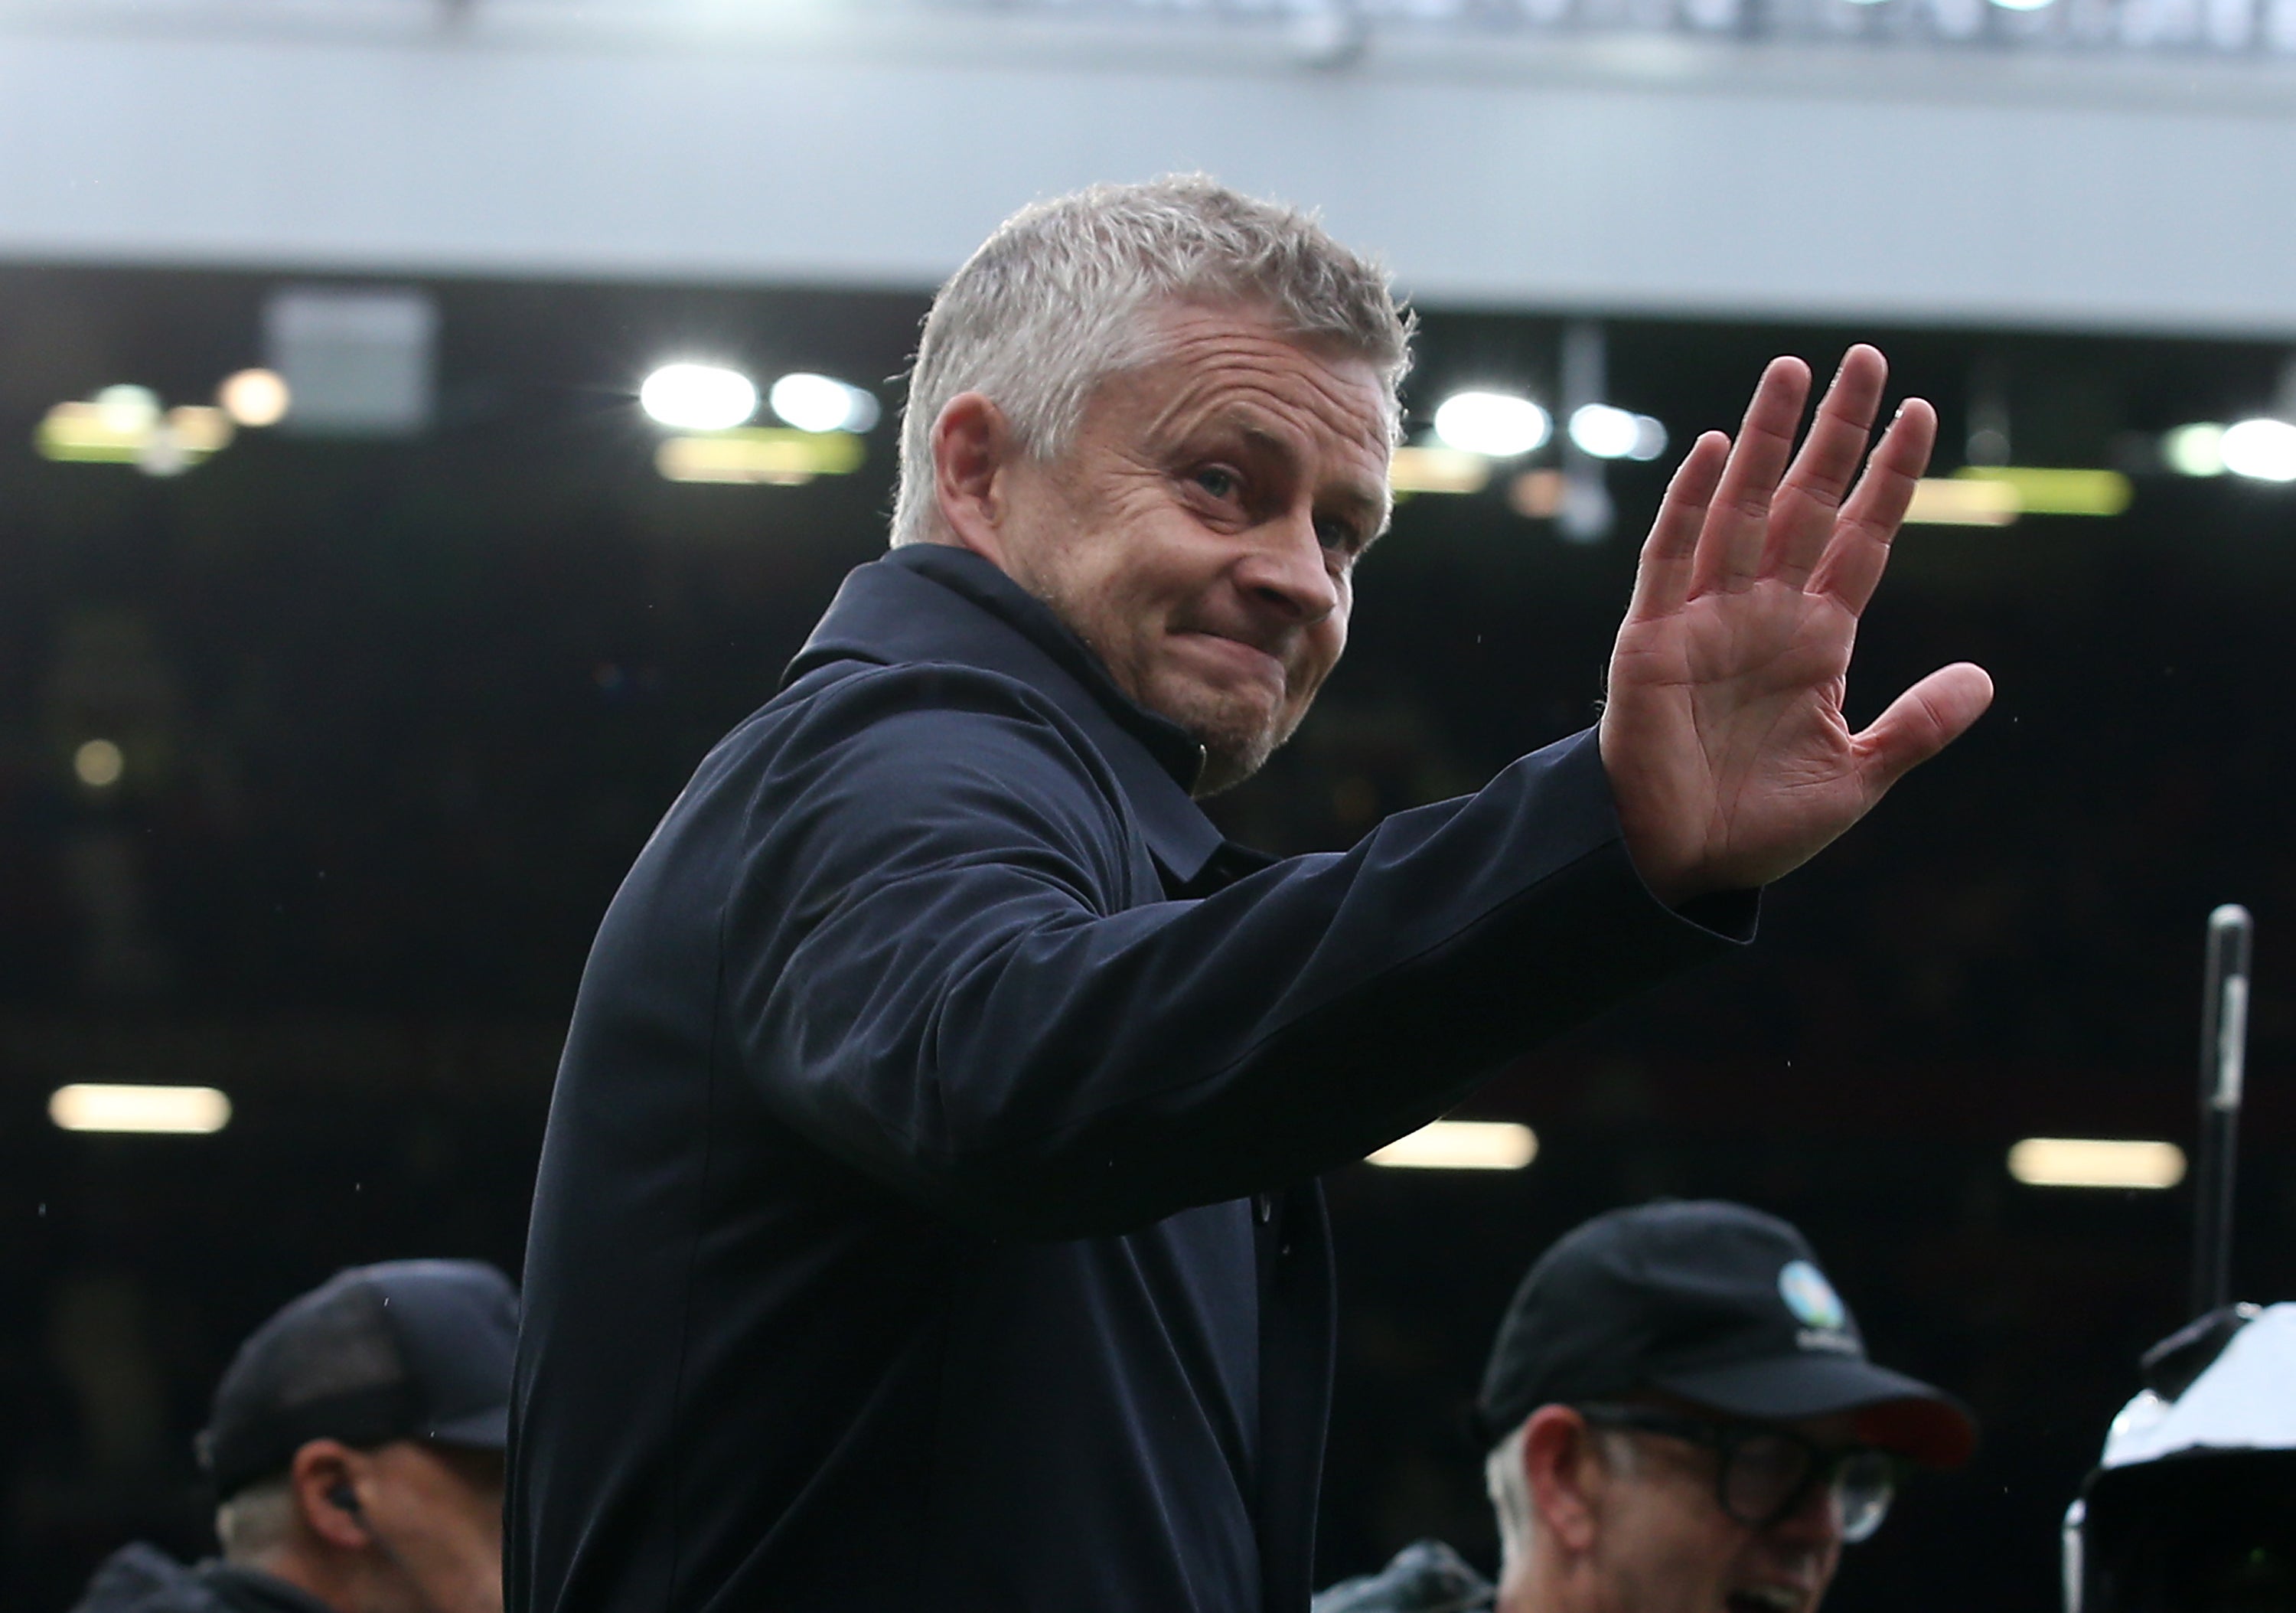 Ole Gunnar Solskjaer’s side missed a chance to go top of Premier League